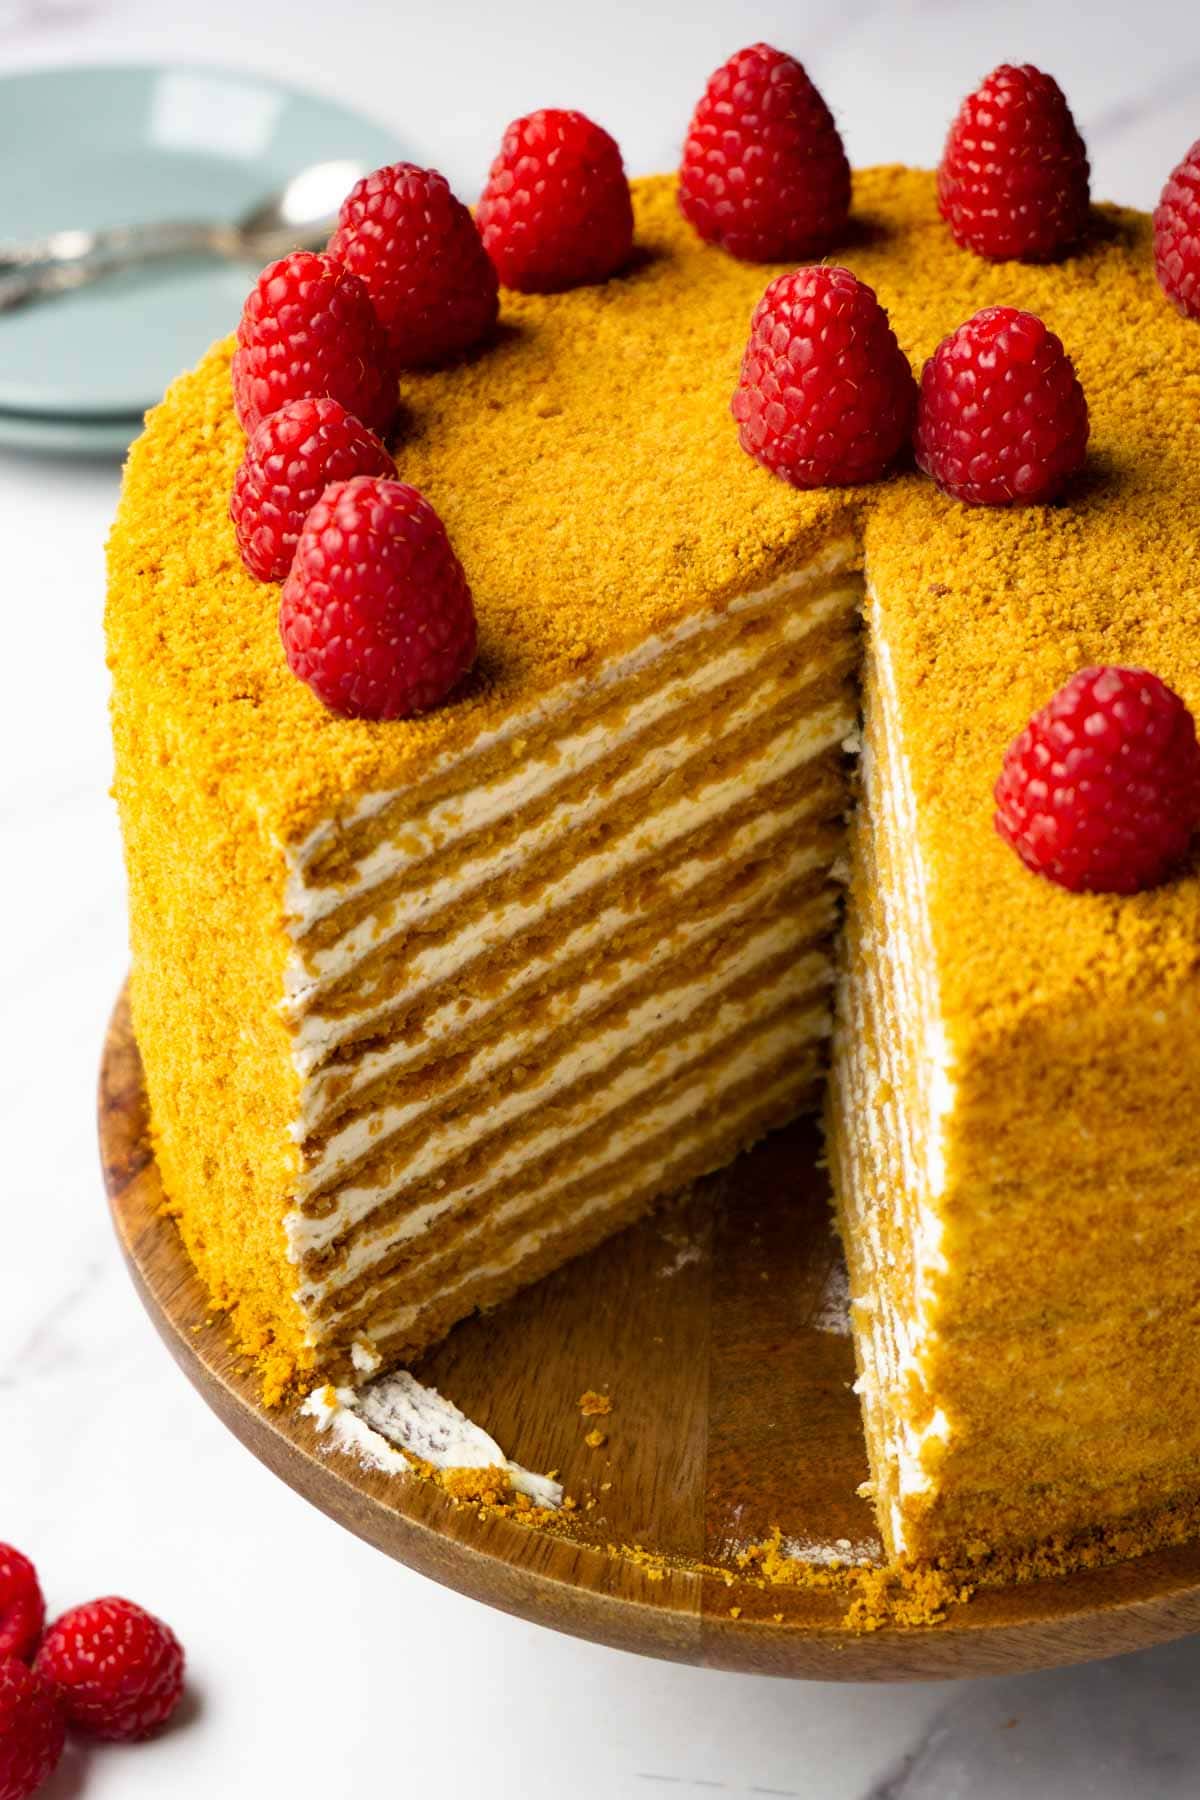 Honey cake decorated with fresh raspberries on a wooden cake stand, one piece taken.